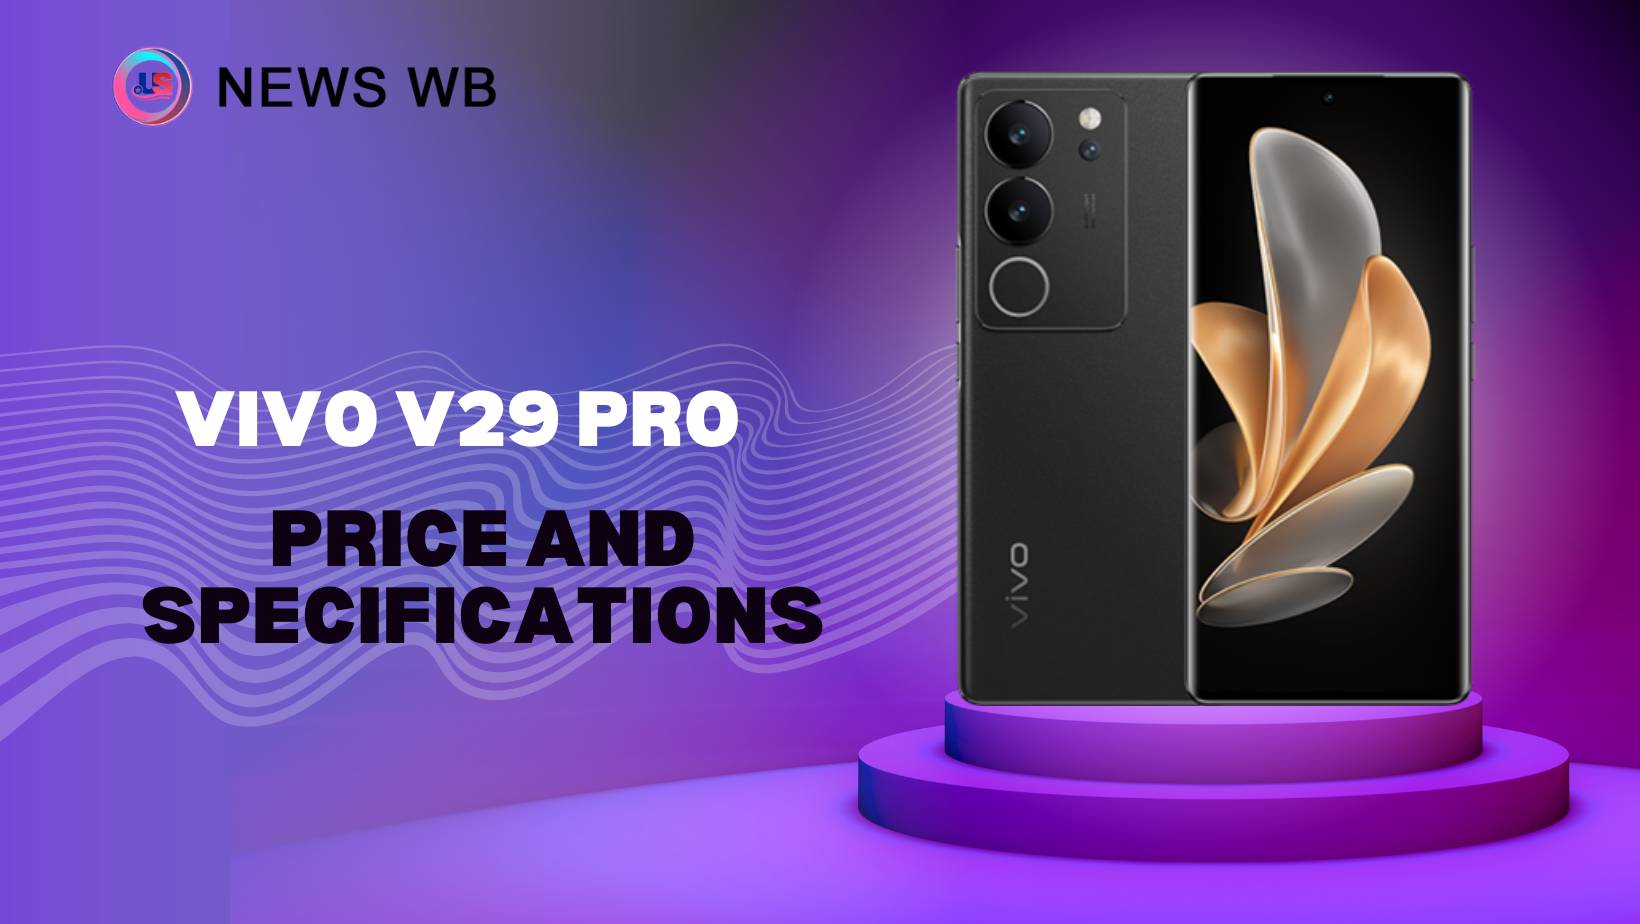 Vivo V29 Pro Price and Specifications